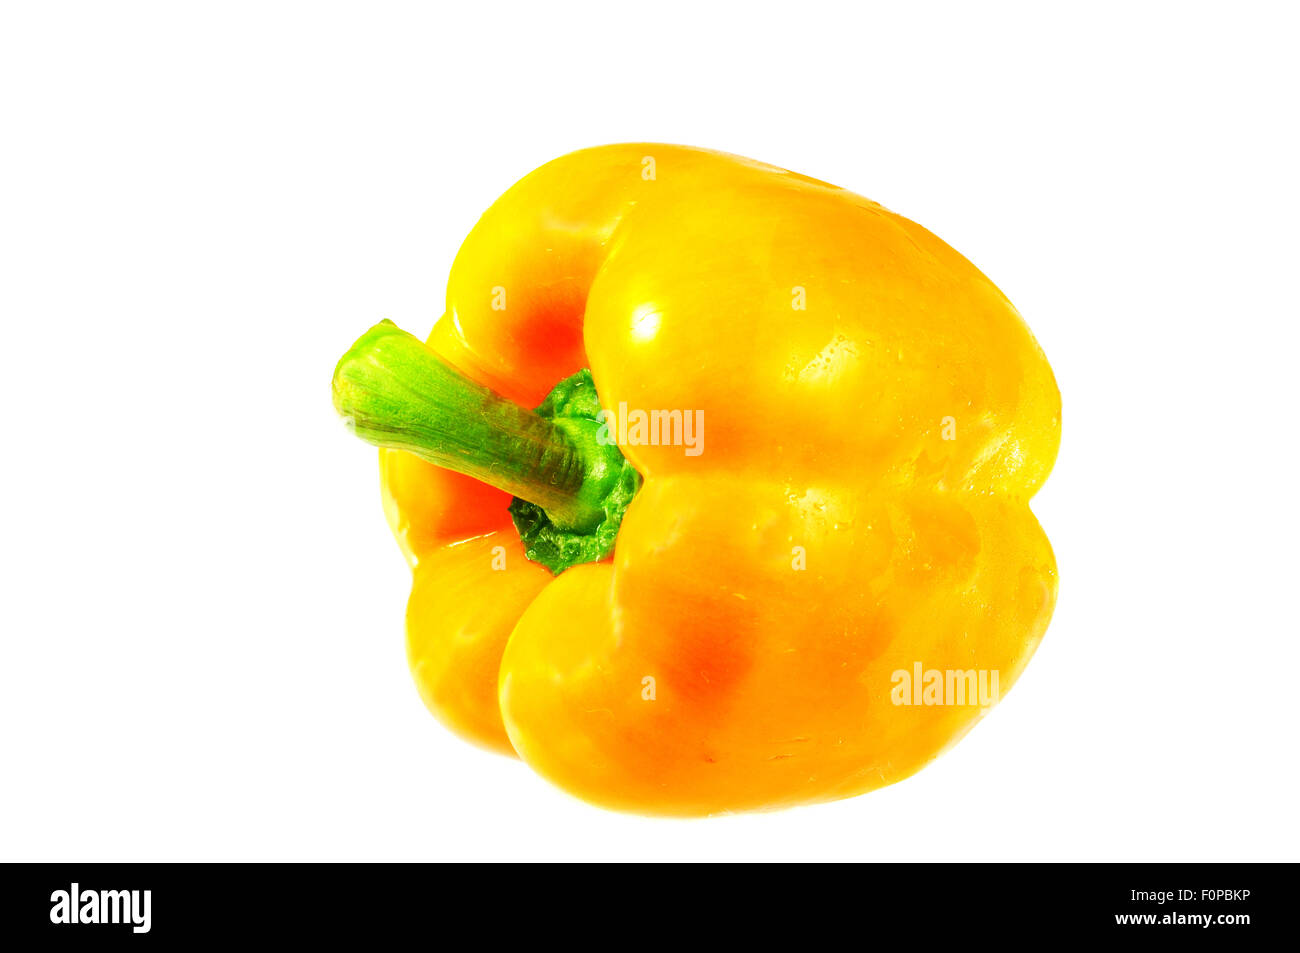 Single yellow-orange bell pepper isolated on white Stock Photo